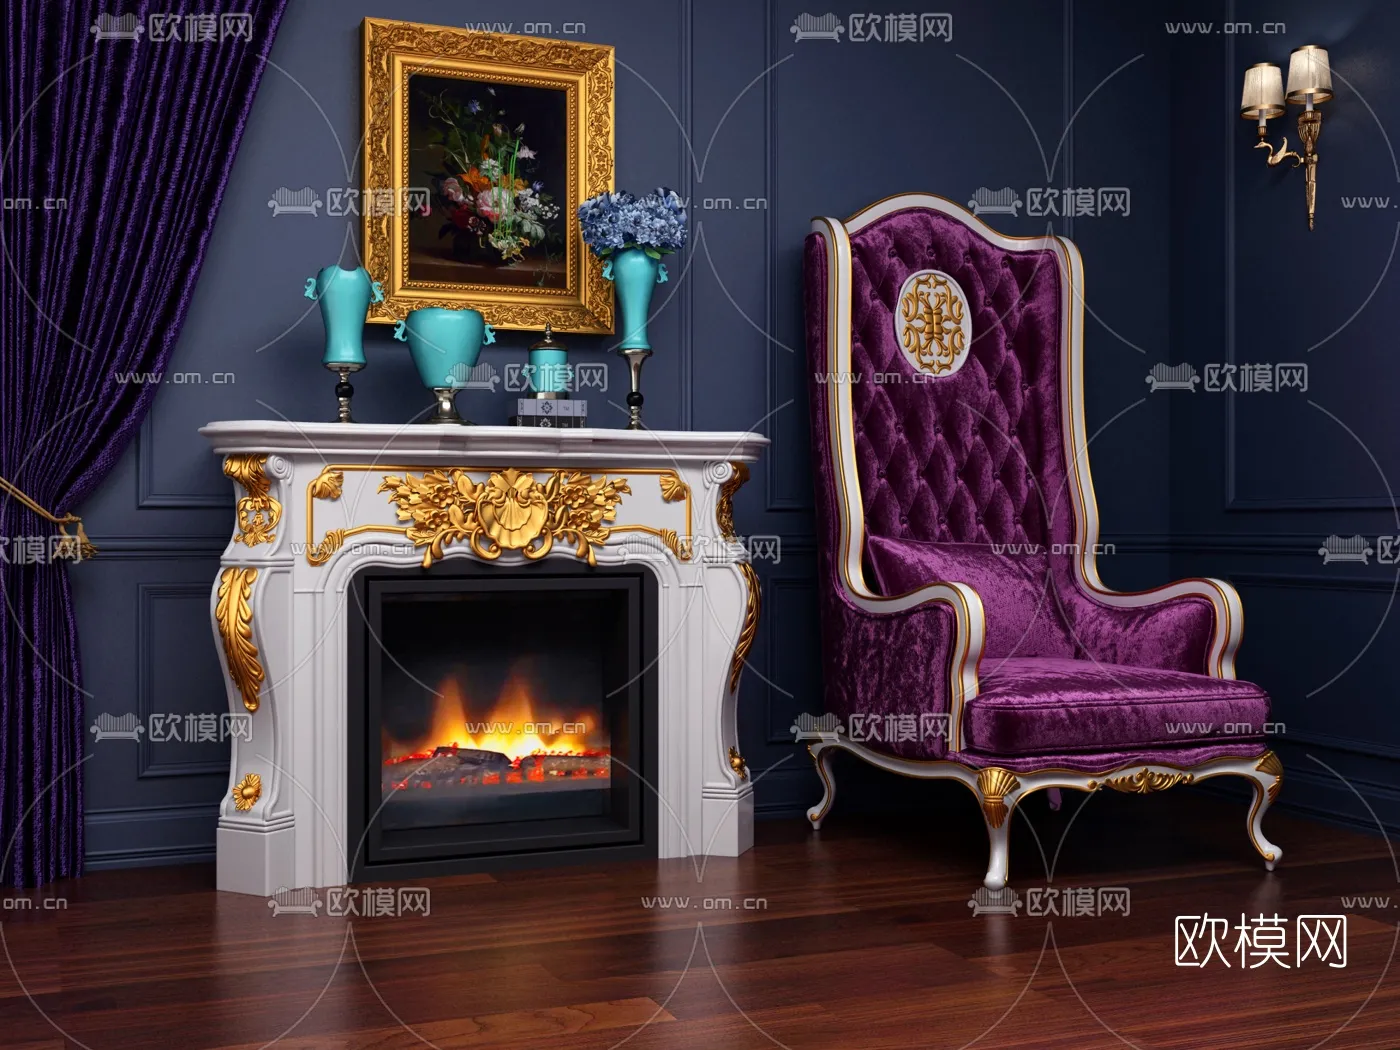 CLASSIC – FIREPLACE 3DMODELS – 059